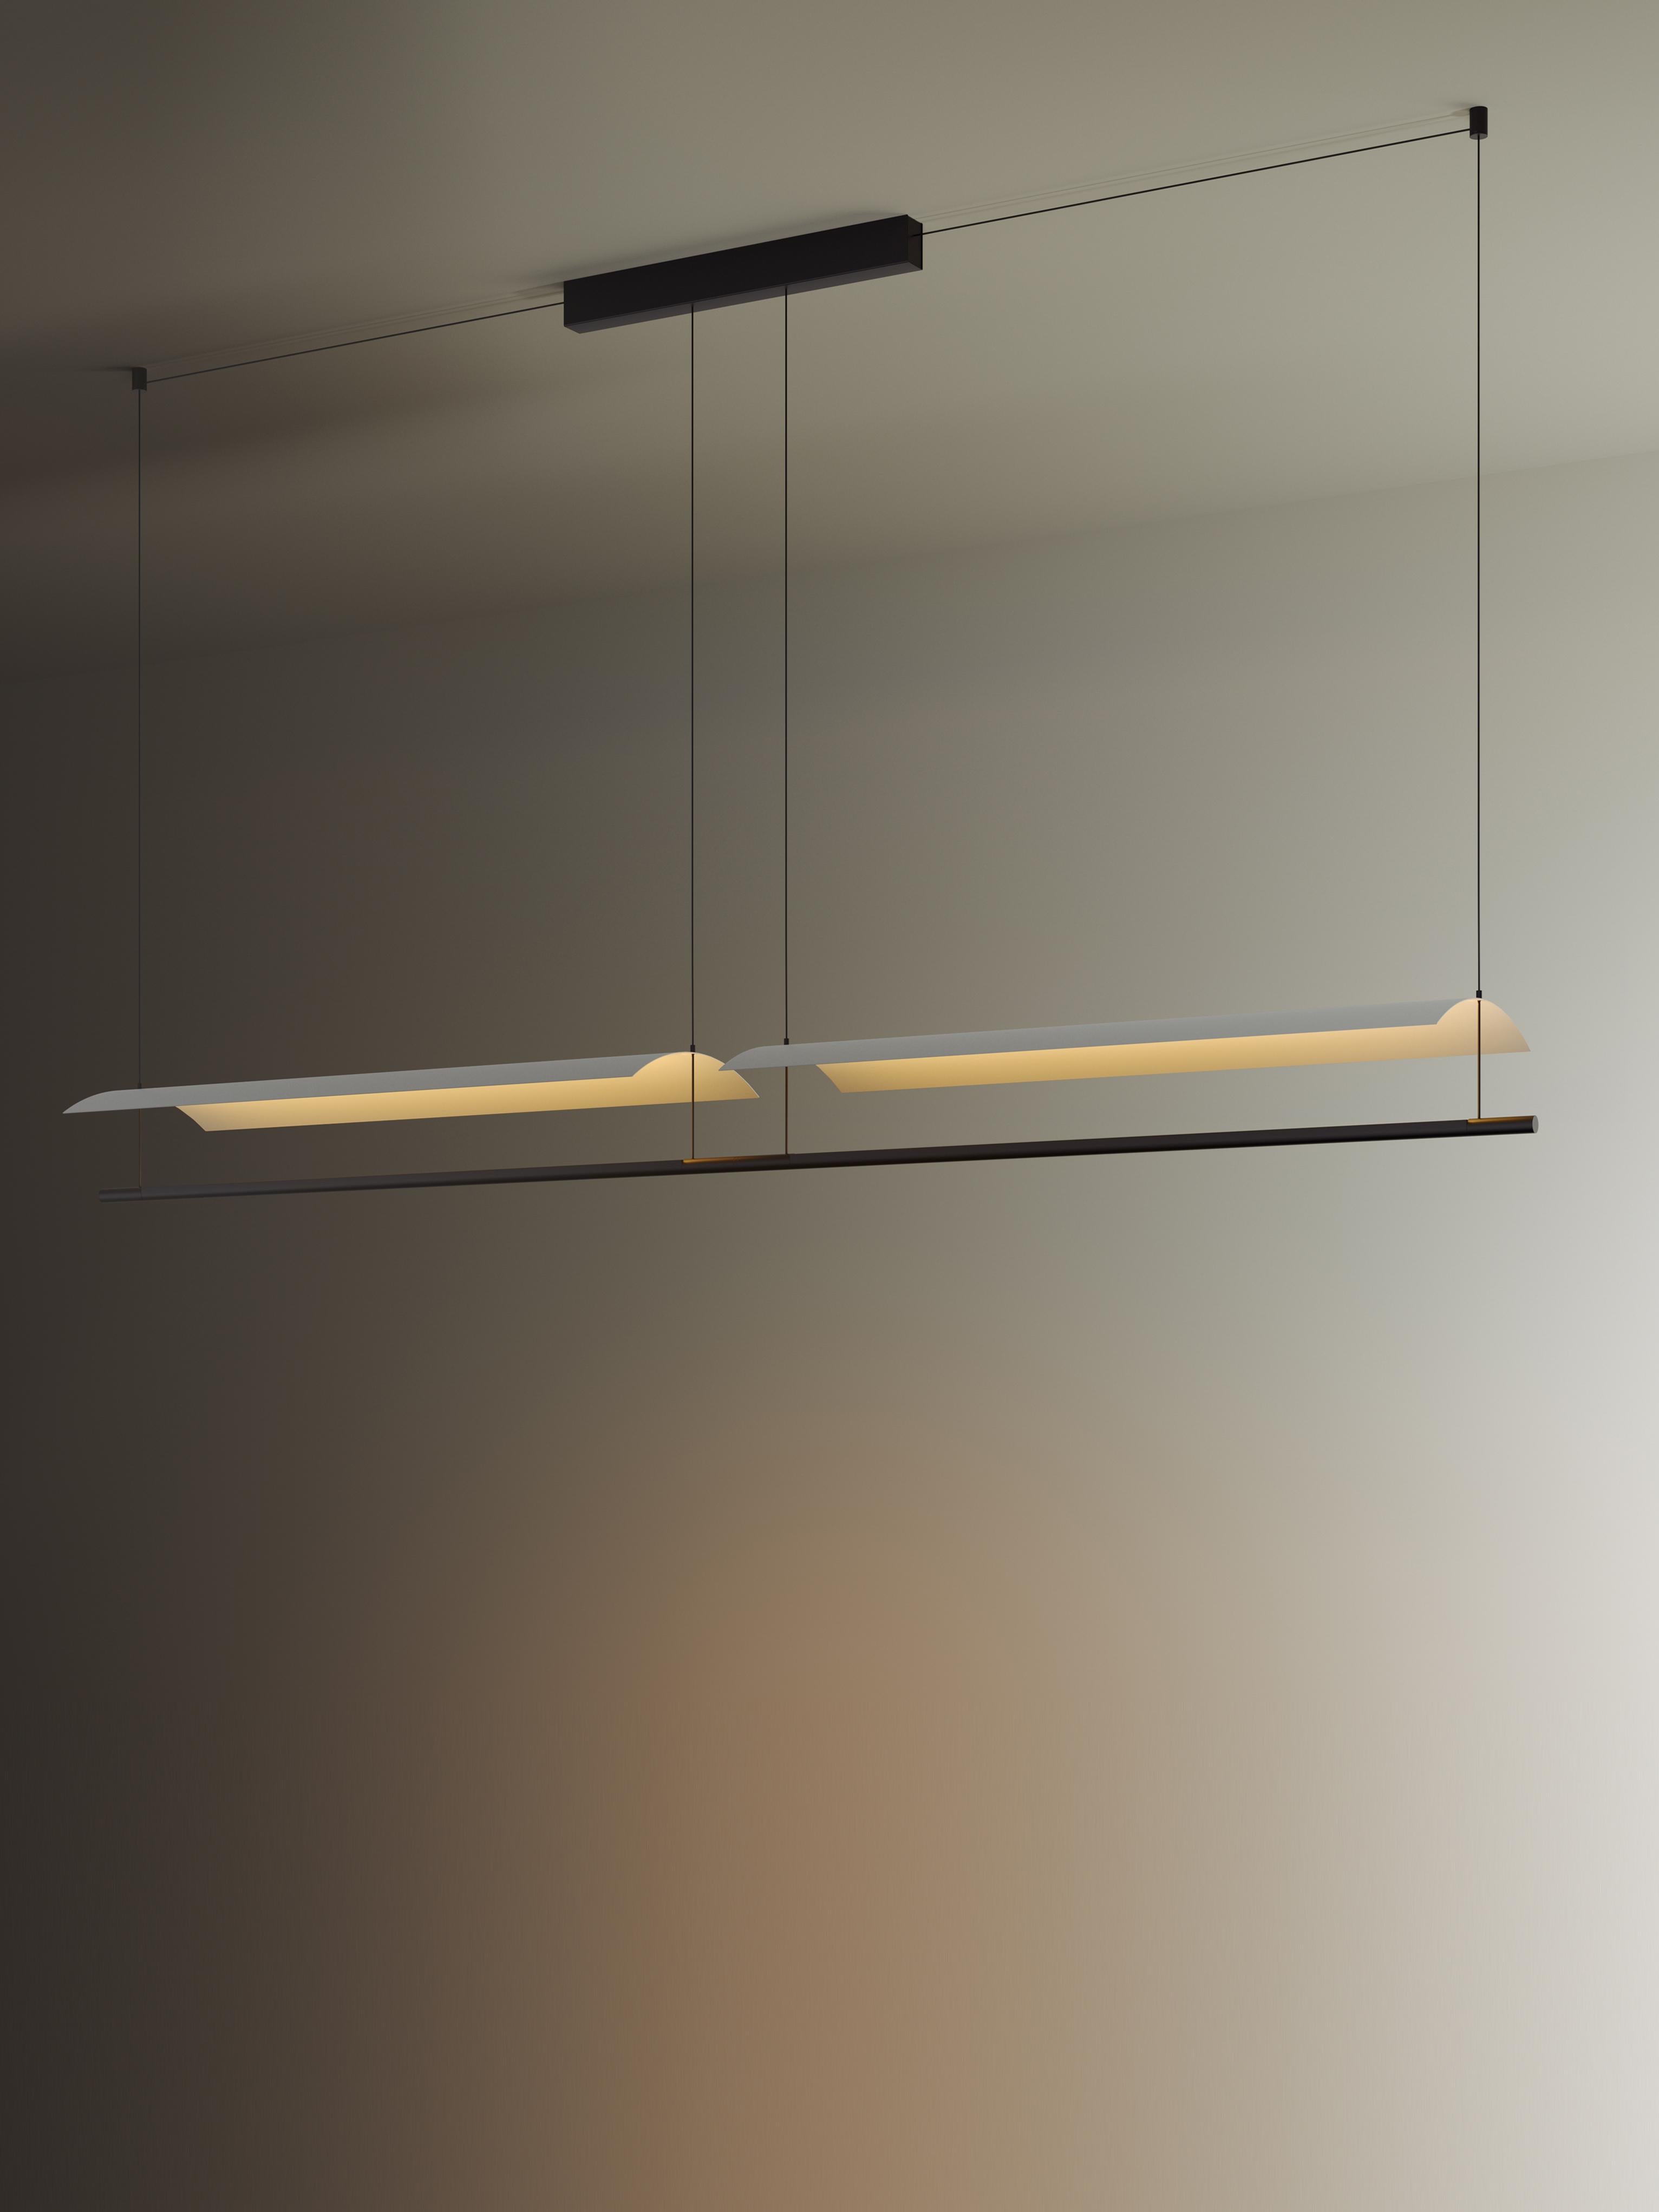 Sistema Lámina 85 pendant lamp by Antoni Arola
Dimensions: D 197.9 x W 30 x H 12.6 cm
Materials: Metal, plastic.
Available in 2,3 or 4 modules.

A line of light and a thin metal sheet create a soft but effective levity. A marriage of the poetic